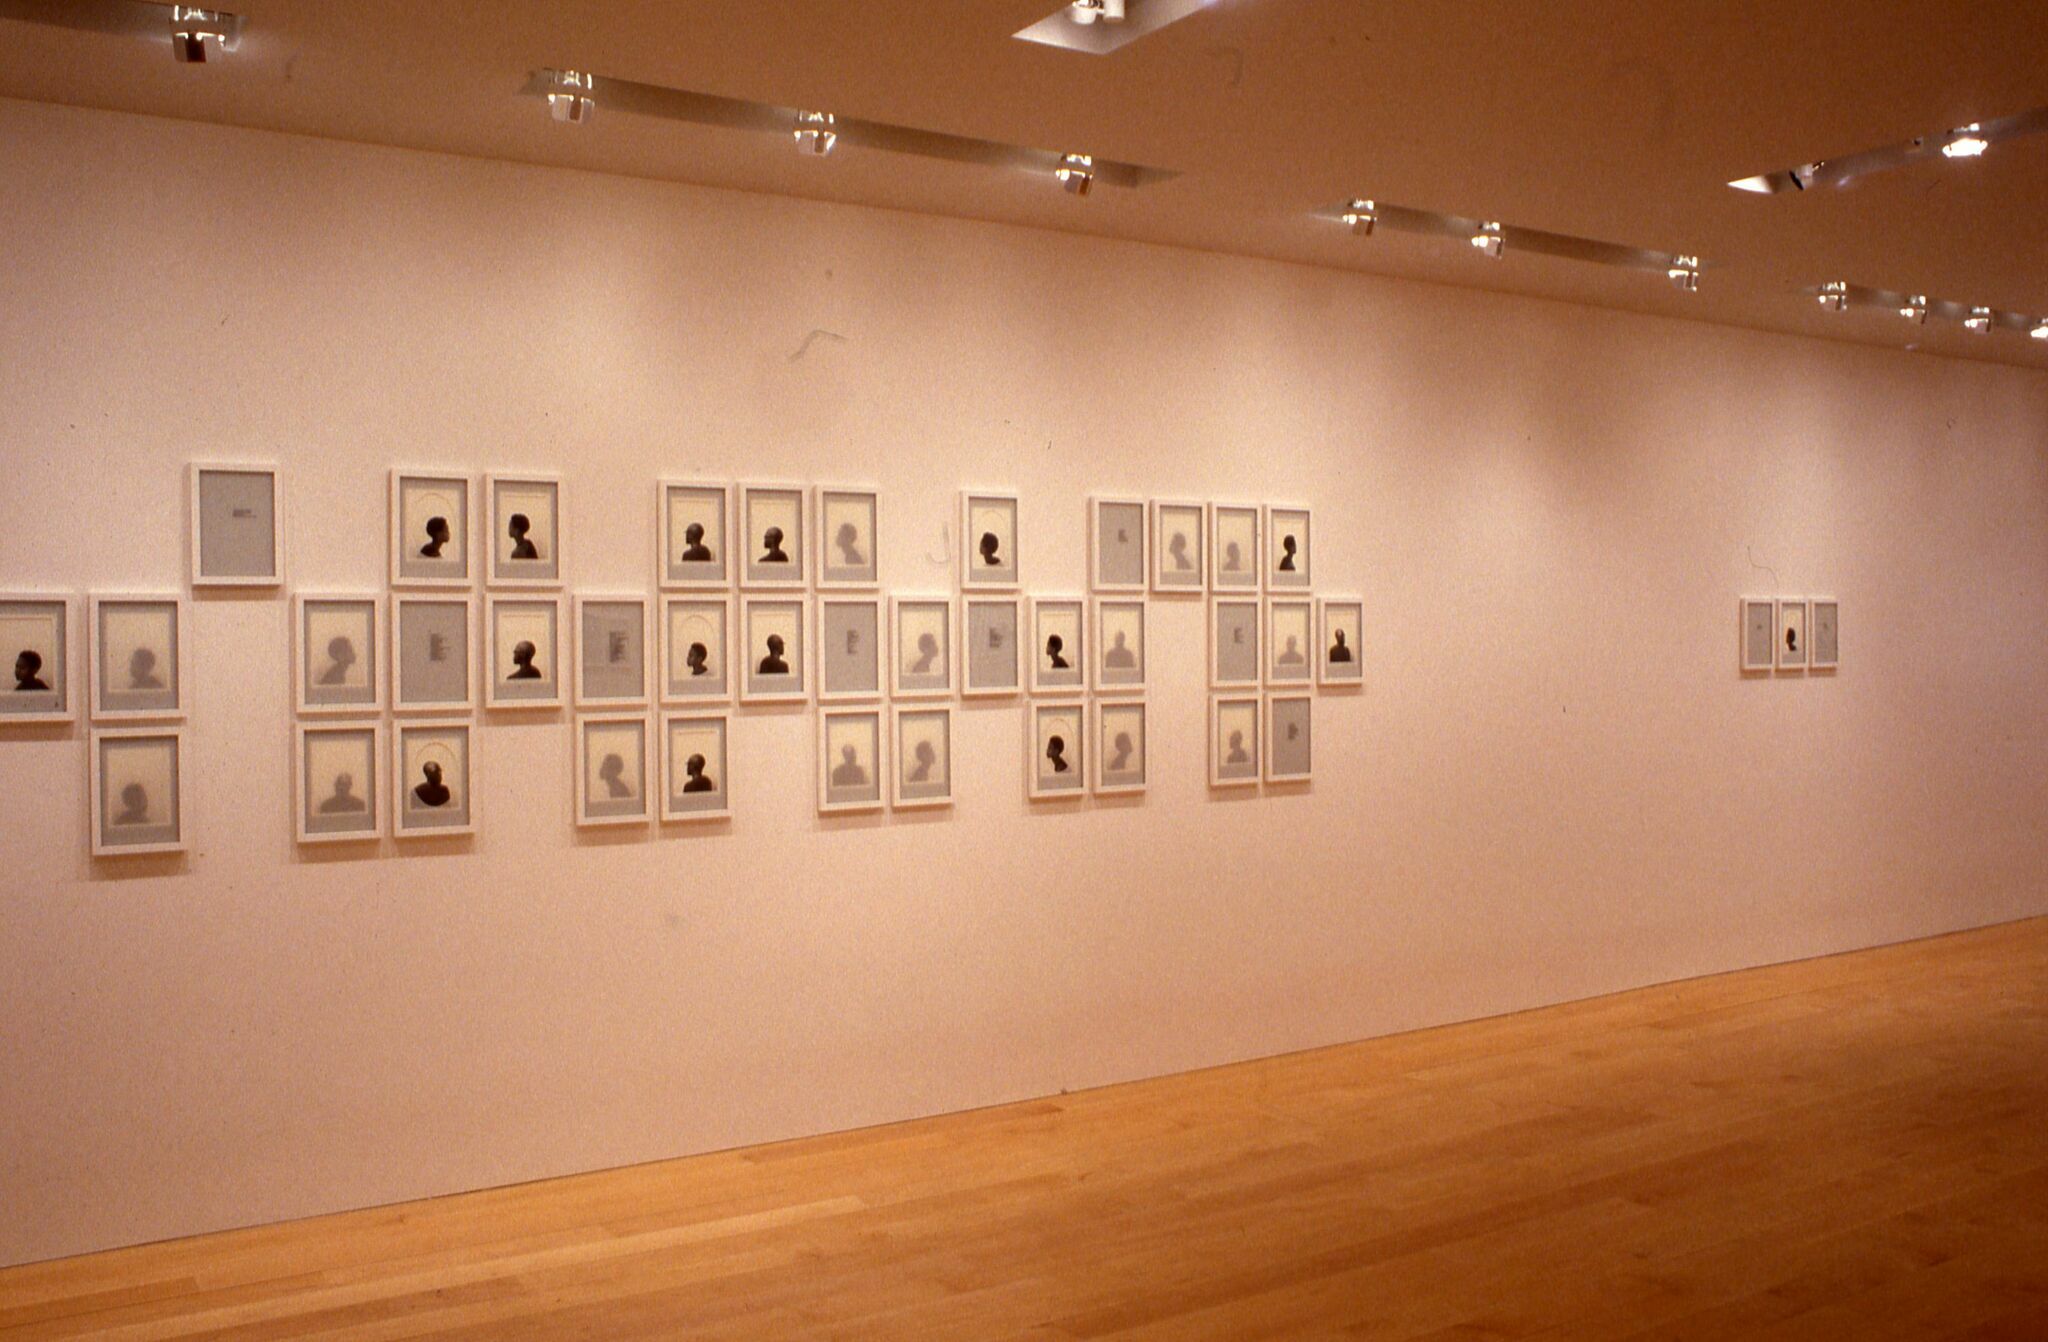 A series of frames in a gallery displaying artworks depicting silhouettes.